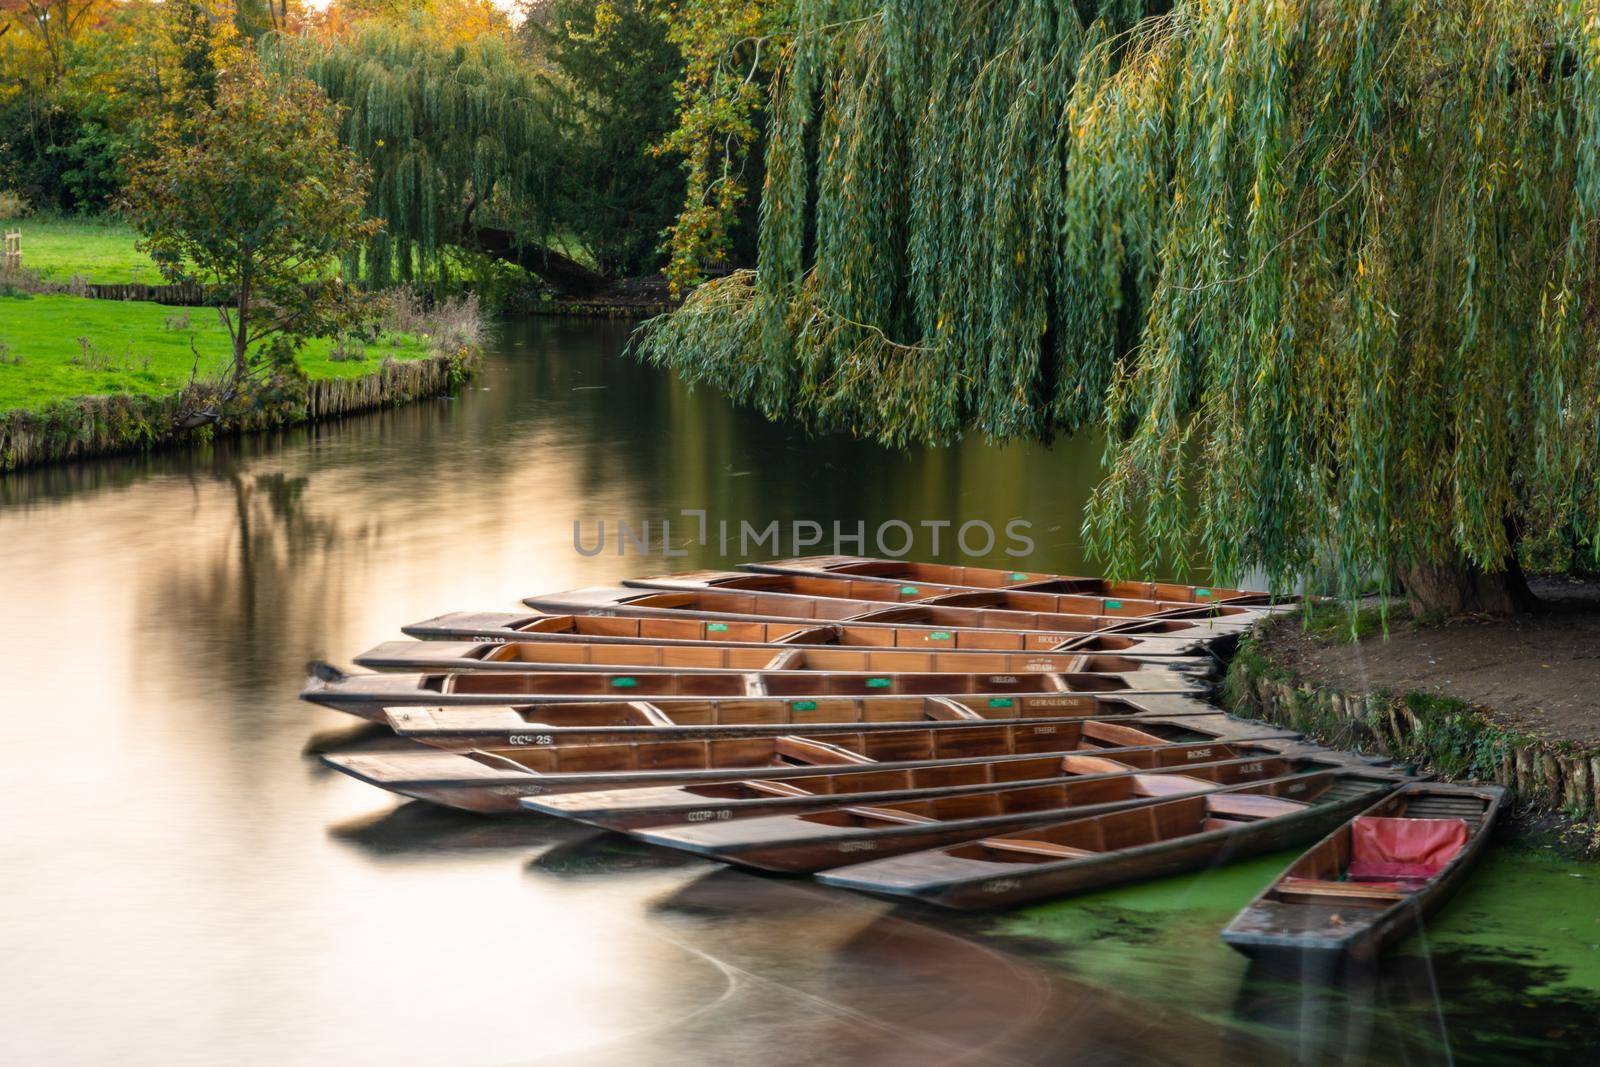 Group of punts docked on the side of rive Cam, Cambridge, UK  by mauricallari